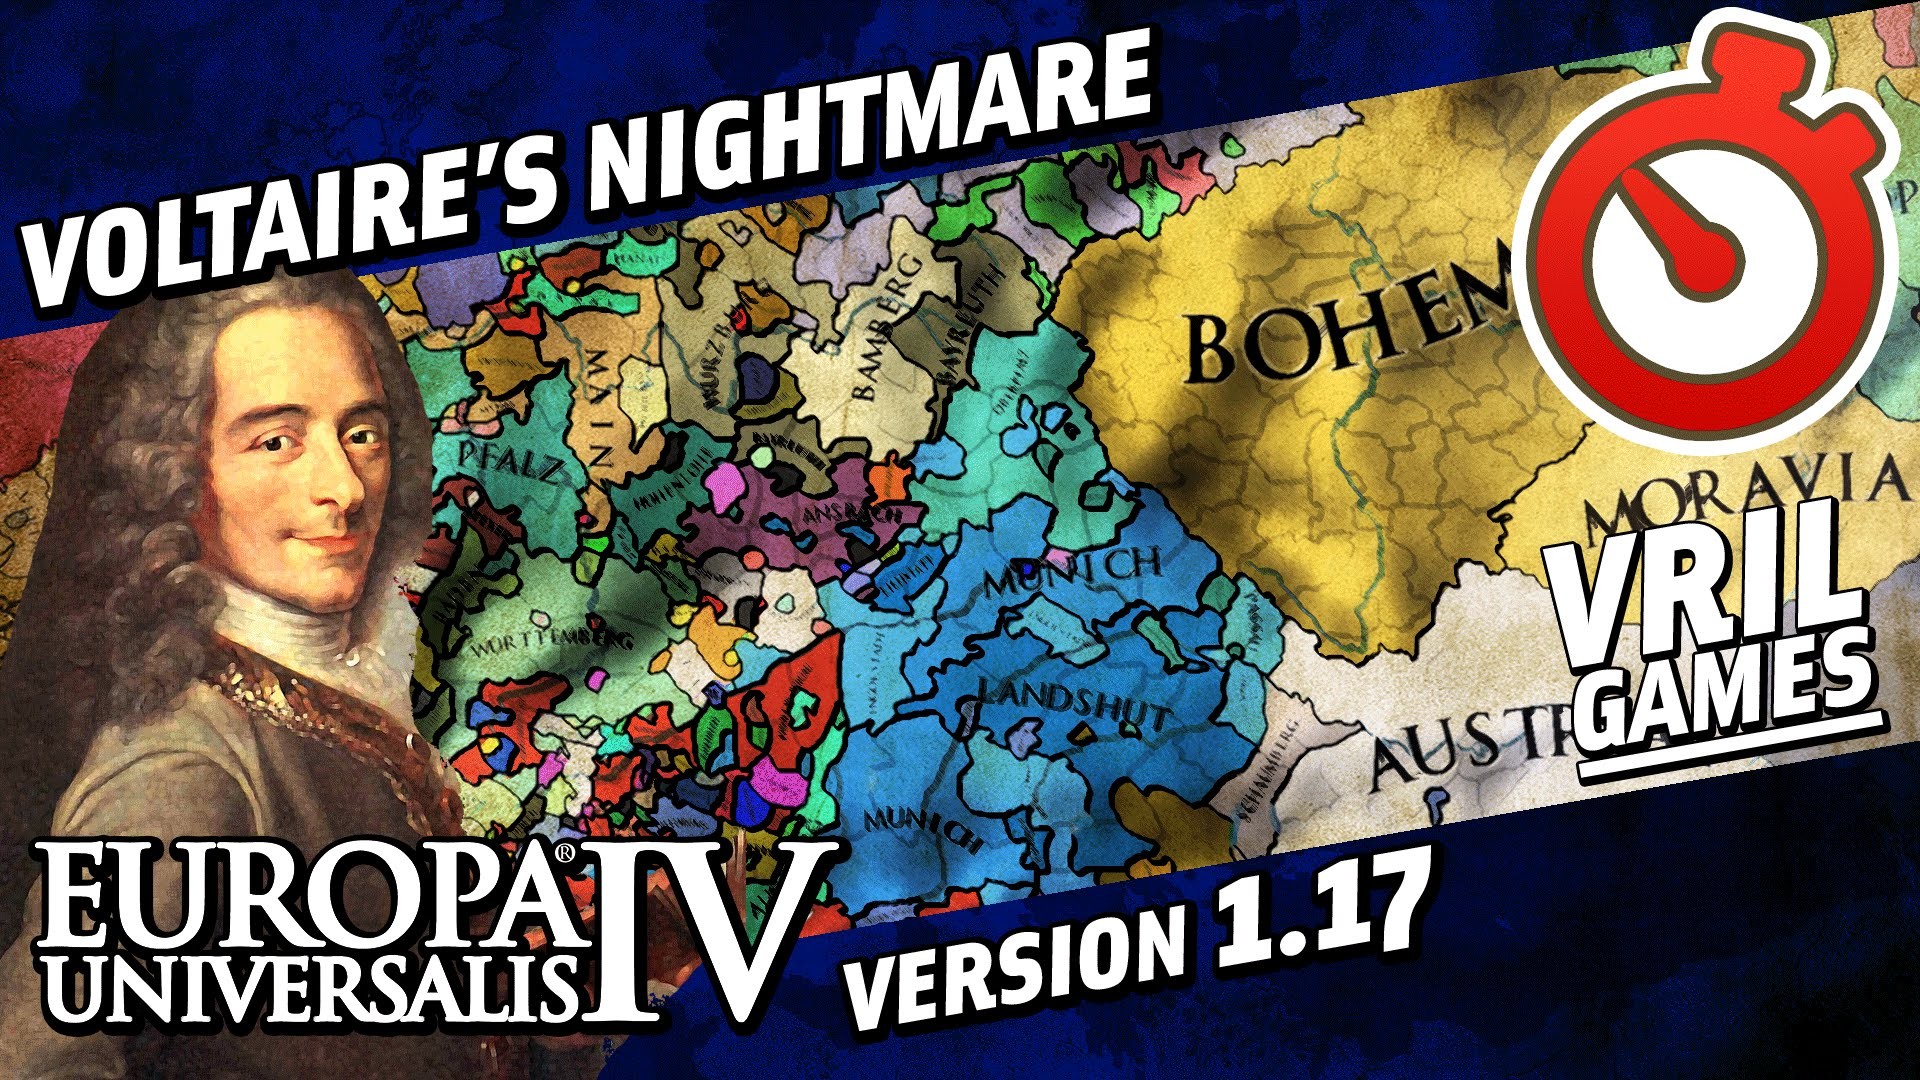 1920x1080 Voltaire's Nightmare | Holy Roman Empire | Europa Universalis 4 Timelapse -  YouTube